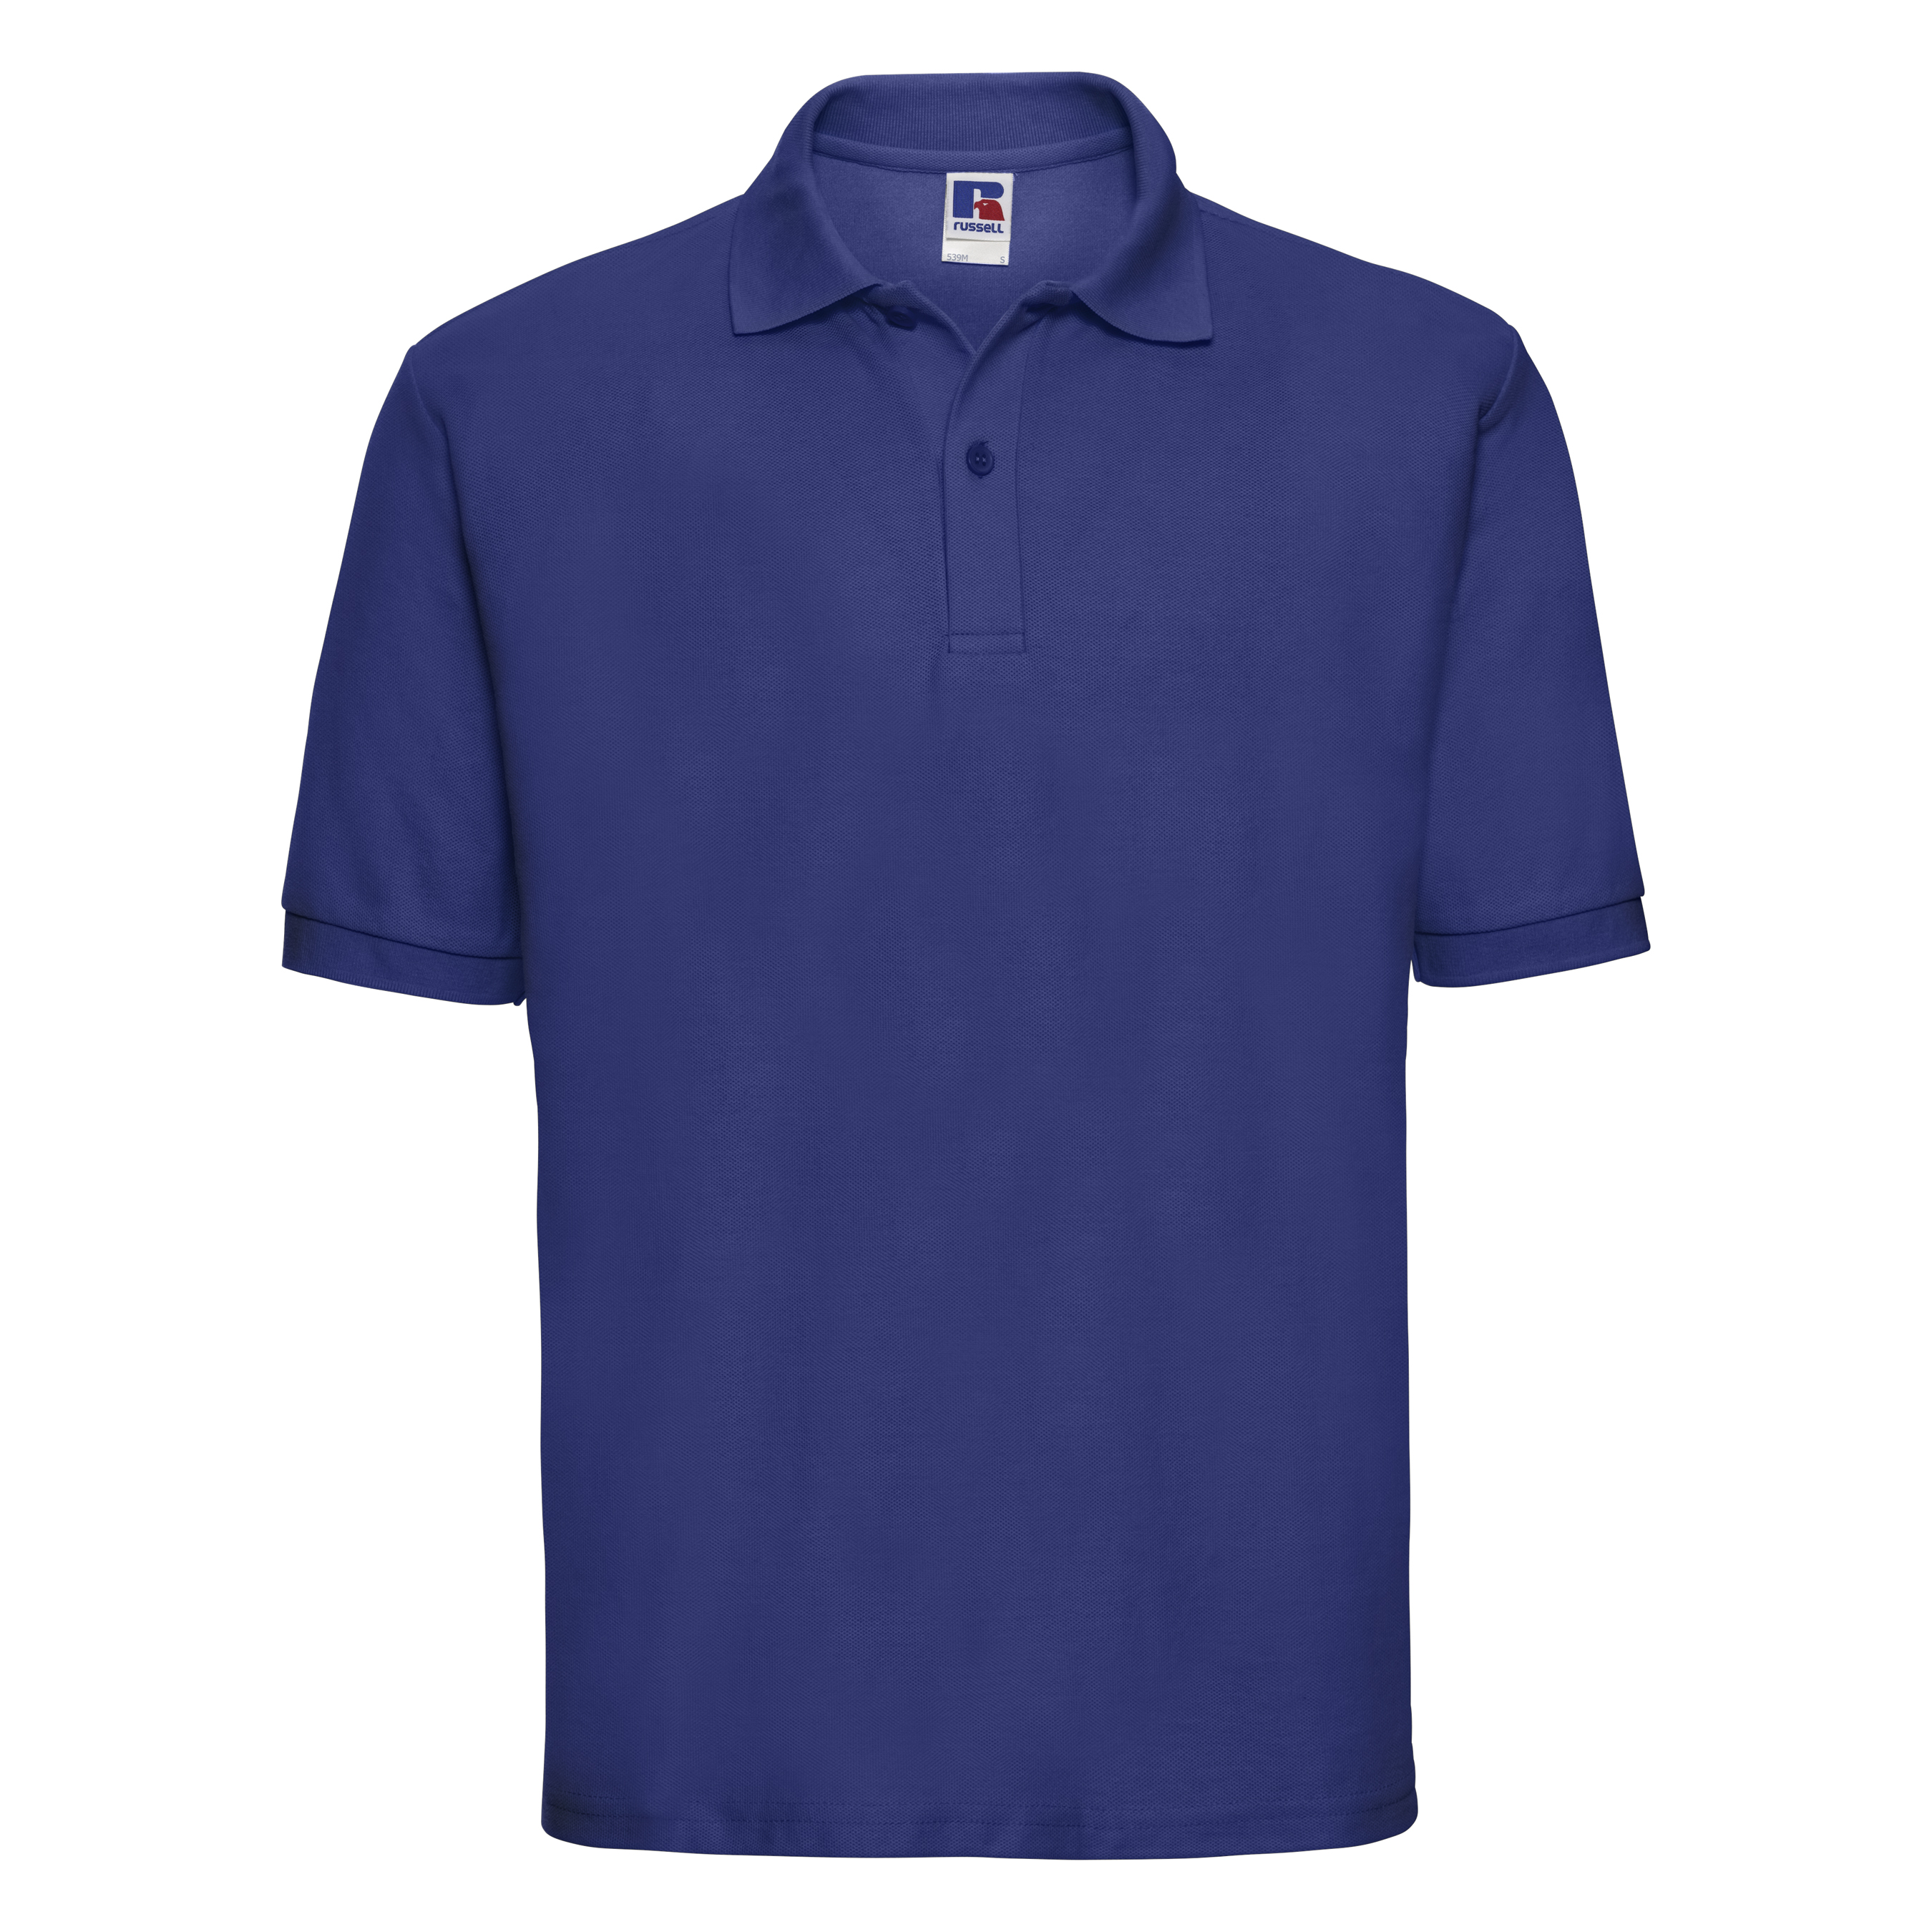 ax-httpswebsystems.s3.amazonaws.comtmp_for_downloadrussell-classic-polycotton-polo-bright-royal.jpg